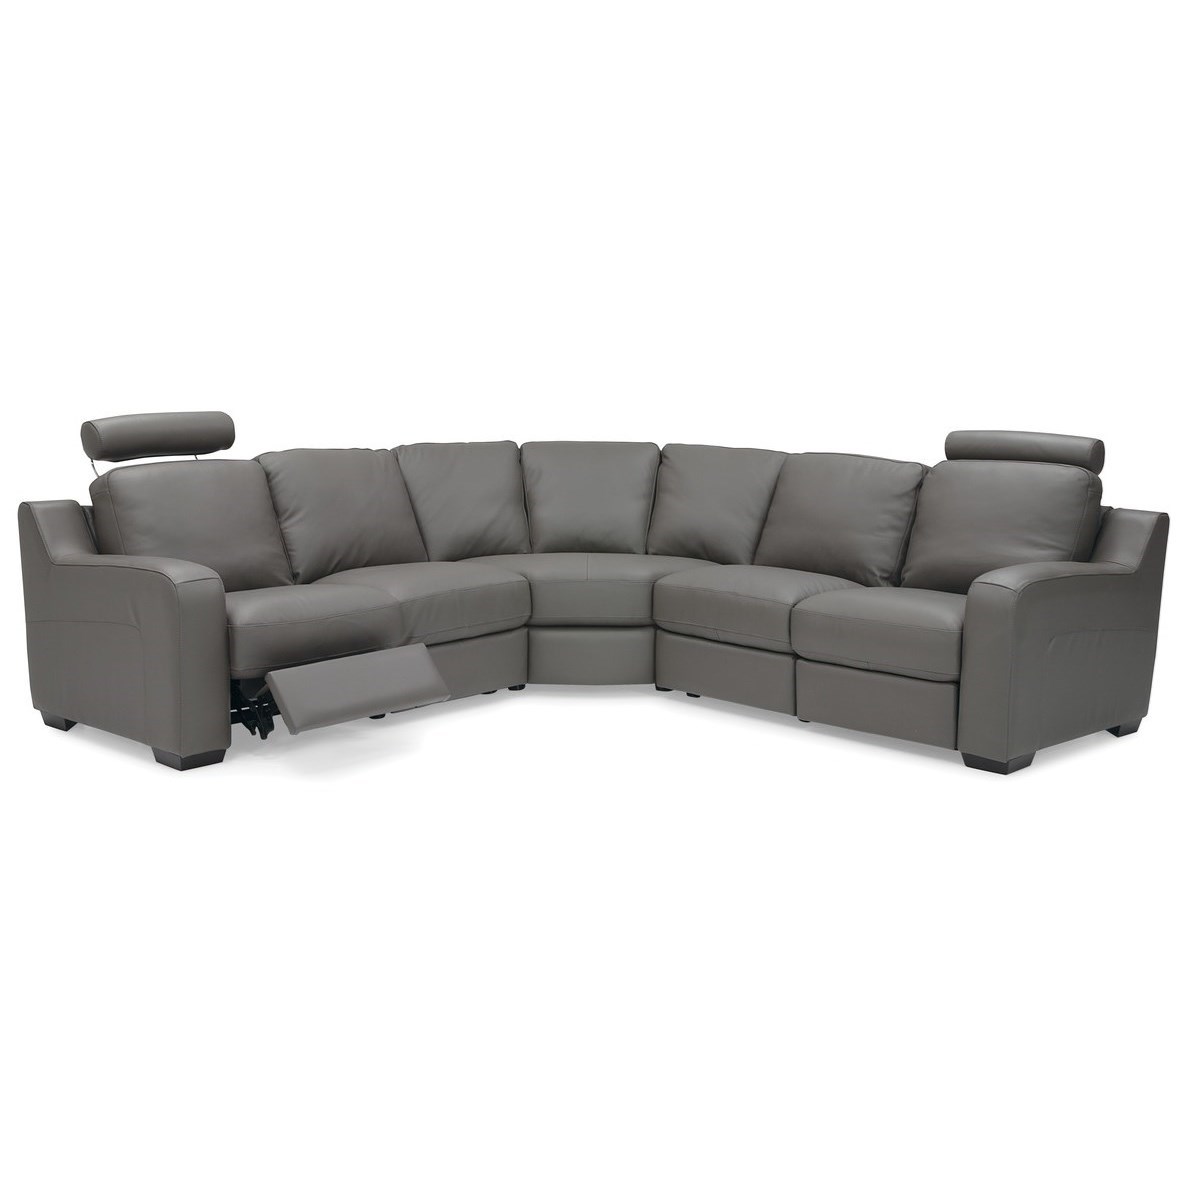 Contemporary 5-Seat Power Reclining Sectional Sofa with Power Tilt Headrests